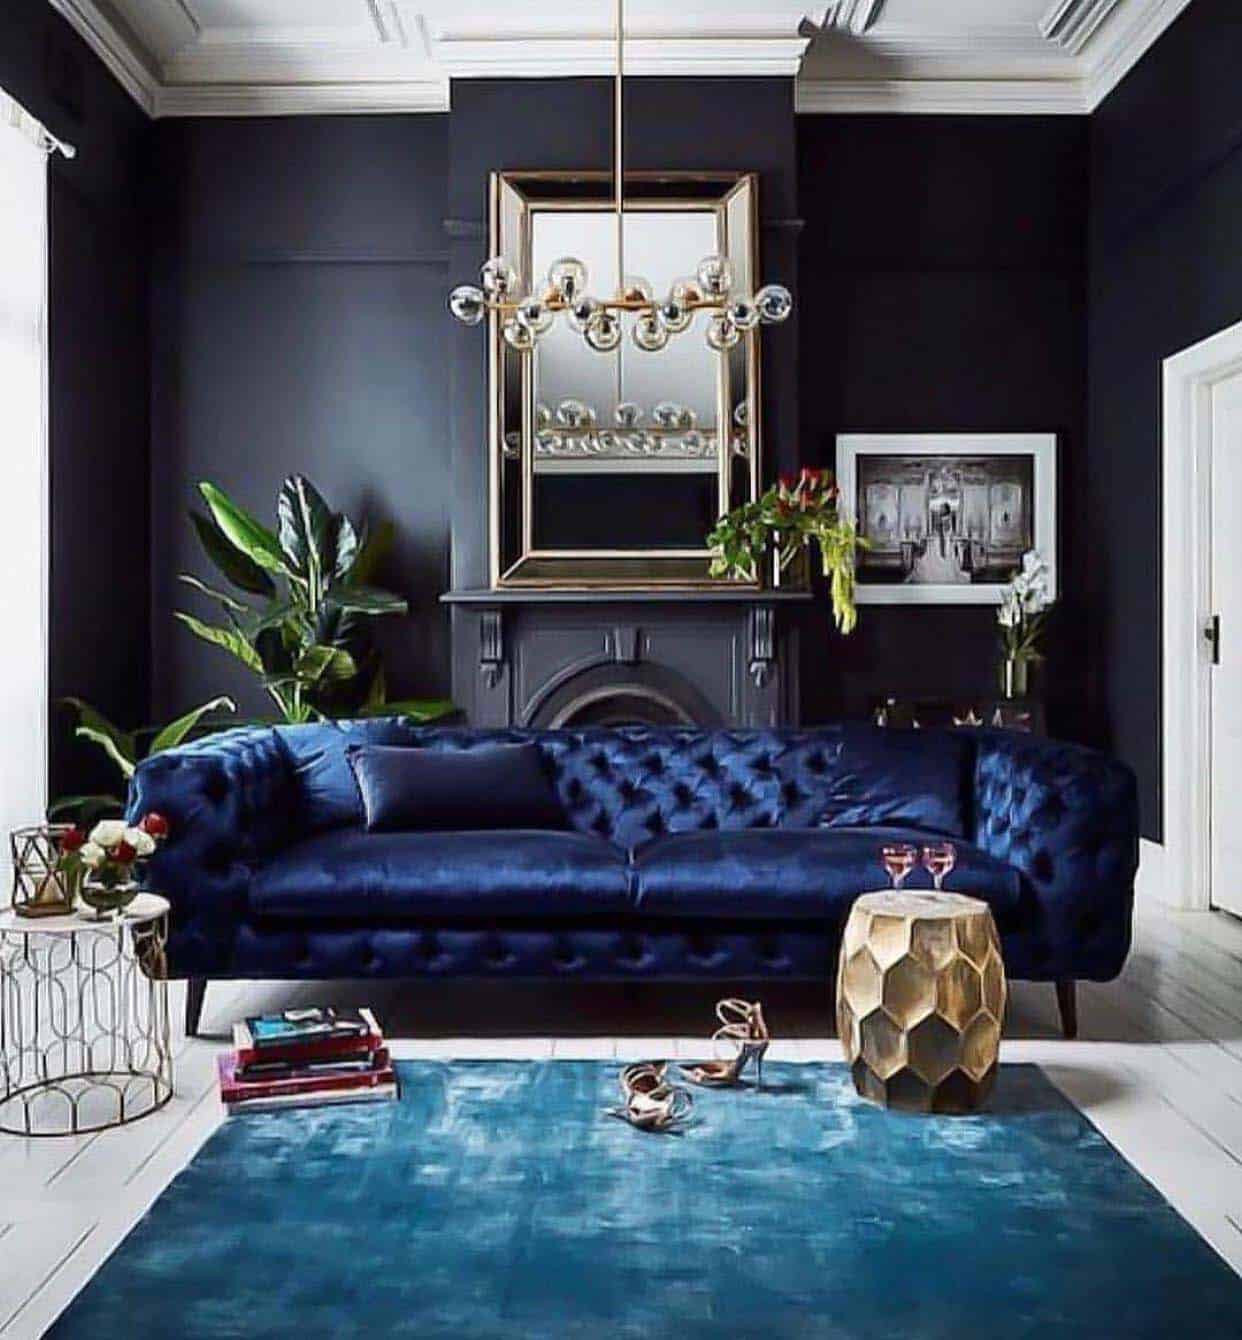 Living Room Walls
 28 Gorgeous living rooms with black walls that create cozy